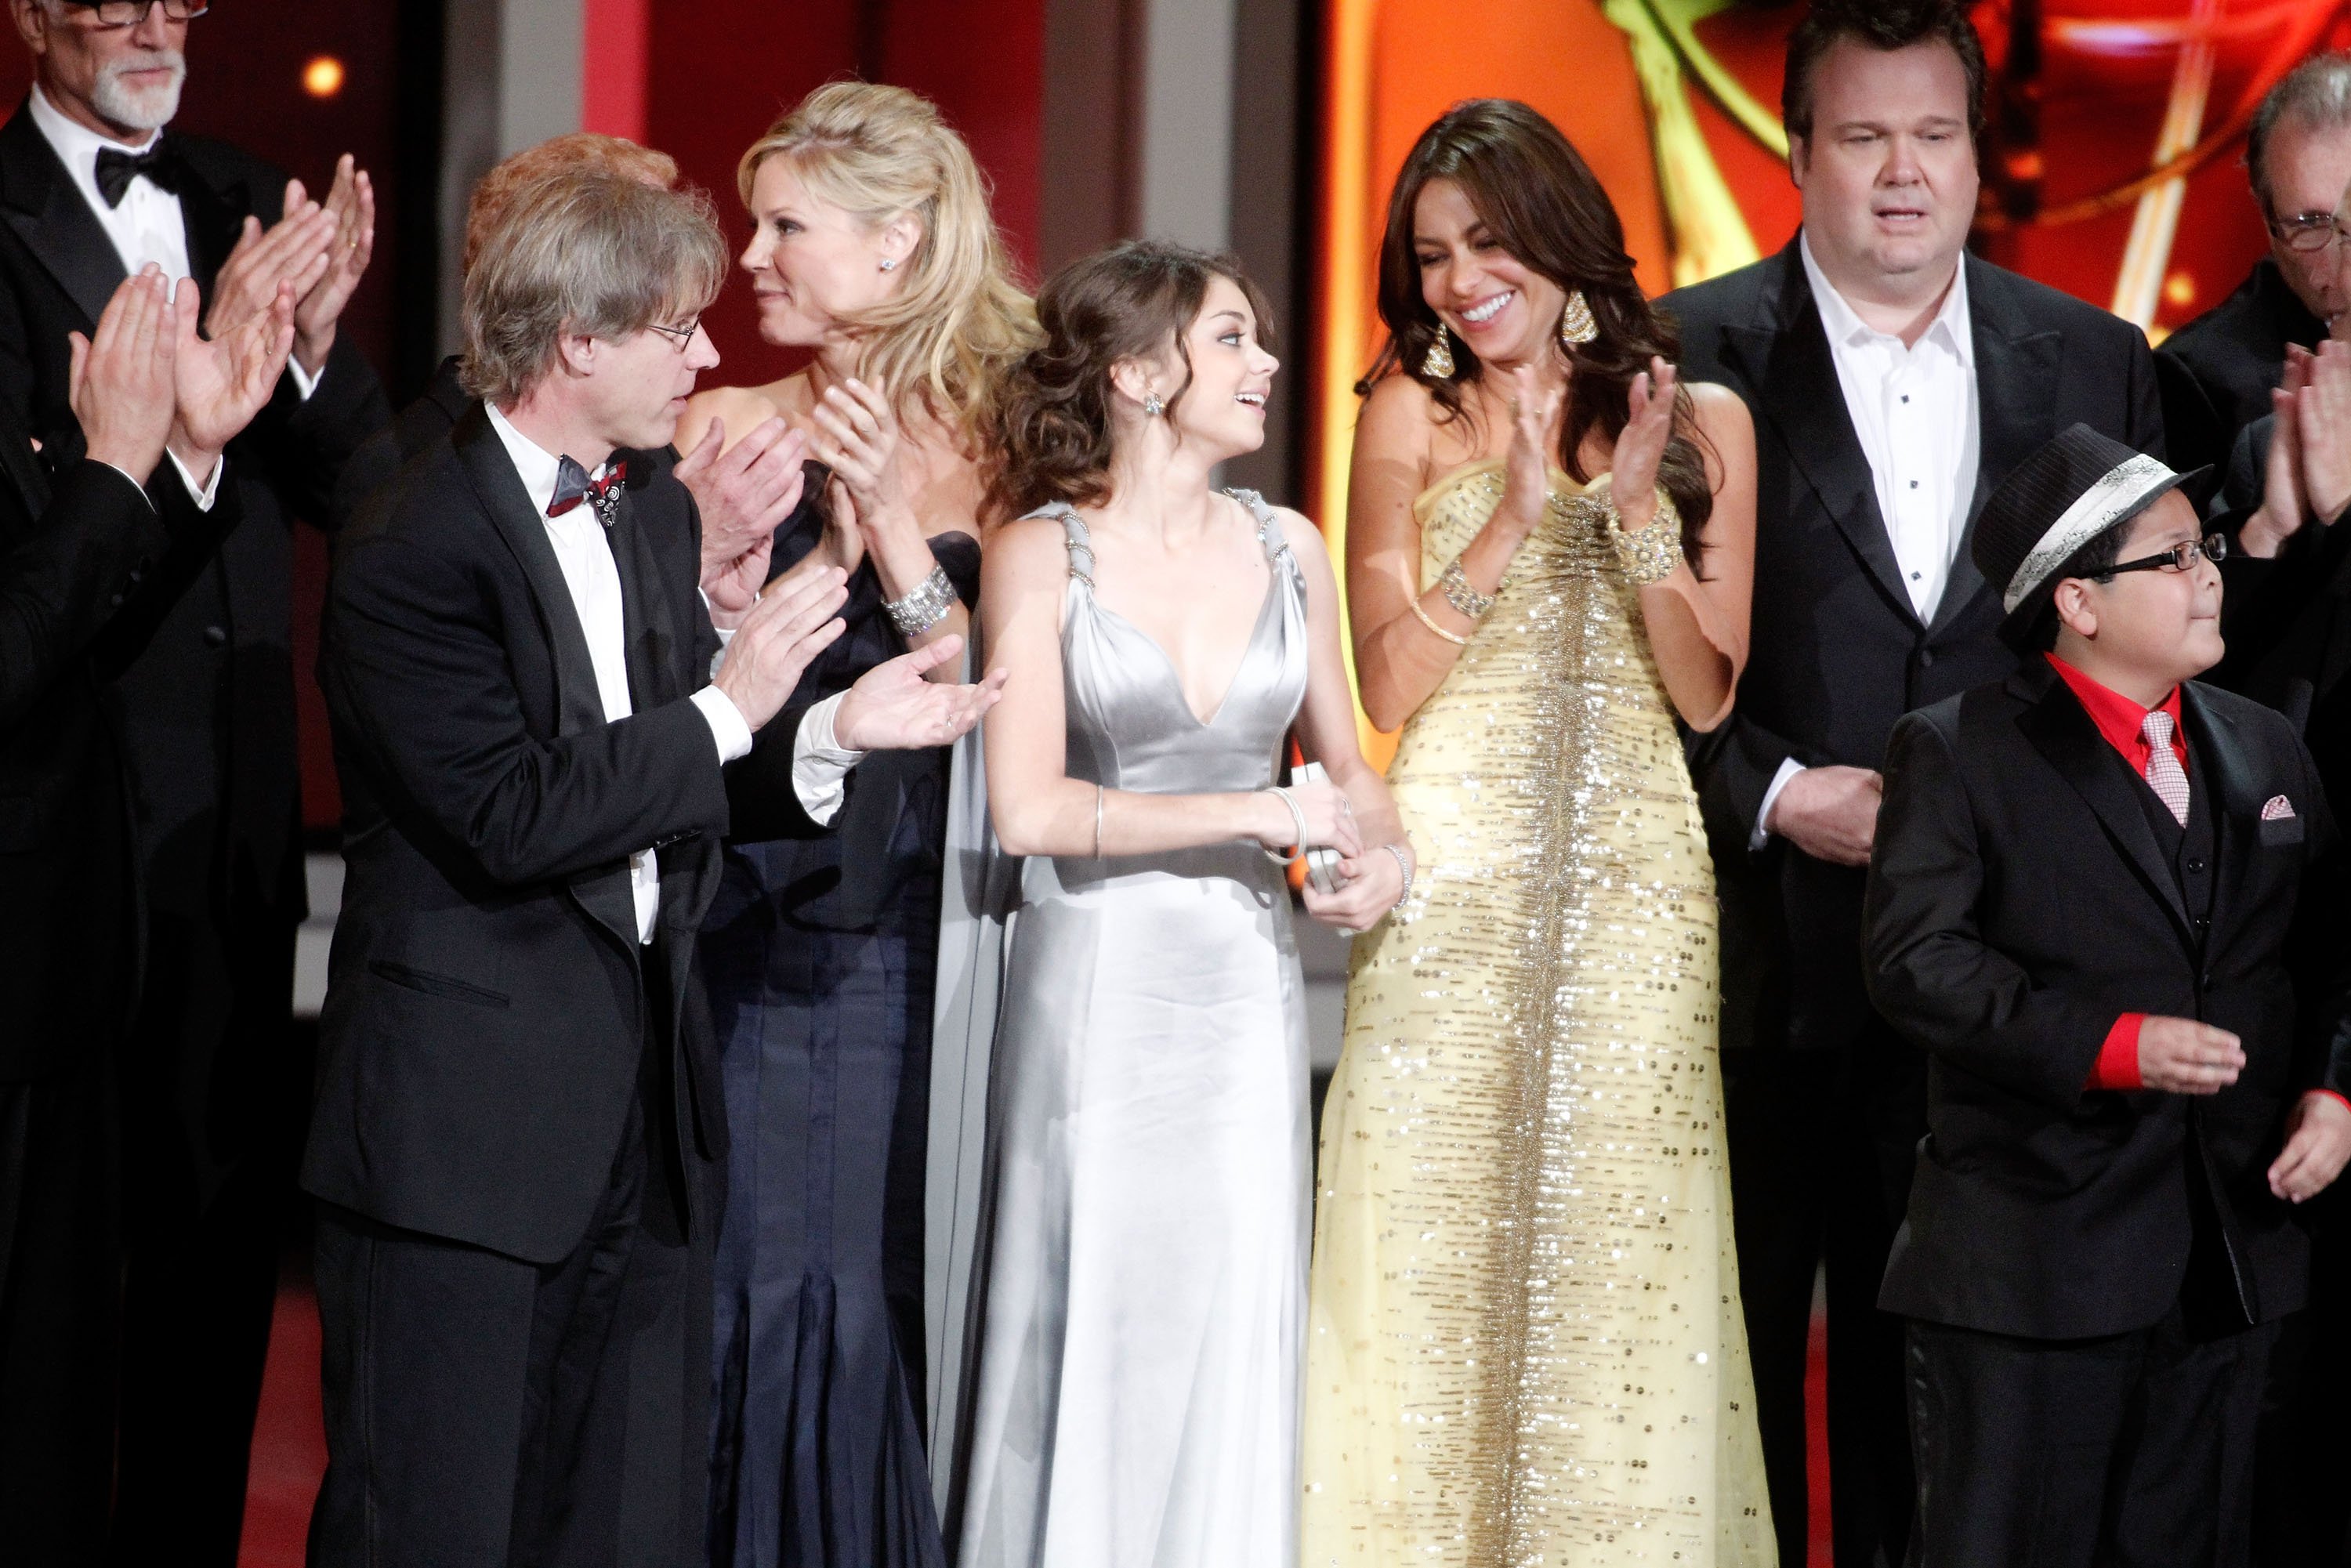 The "Modern Family" cast at the 2010 62nd Annual Primetime Emmy Awards at the Nokia Theater In Los Angeles | Source: Getty Images